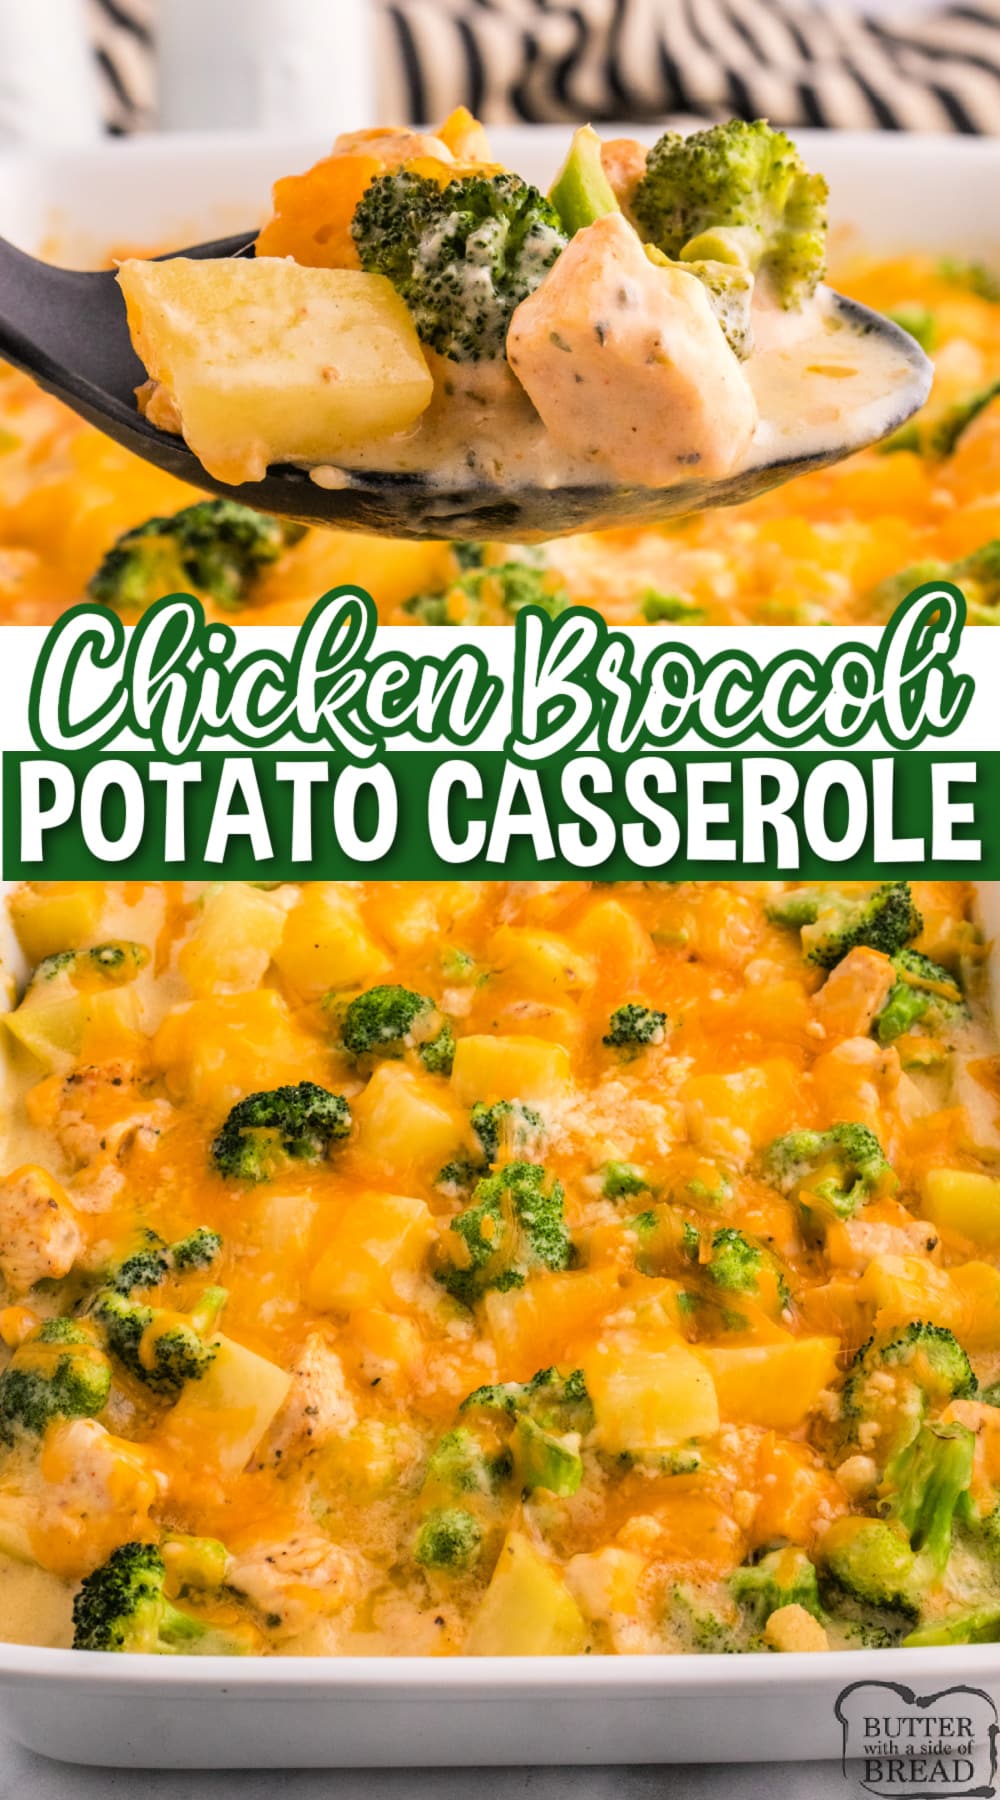 Chicken Broccoli Potato Casserole is a simple and delicious weeknight dinner recipe that the whole family will love. This chicken casserole is loaded with potatoes, broccoli, and cheese. 